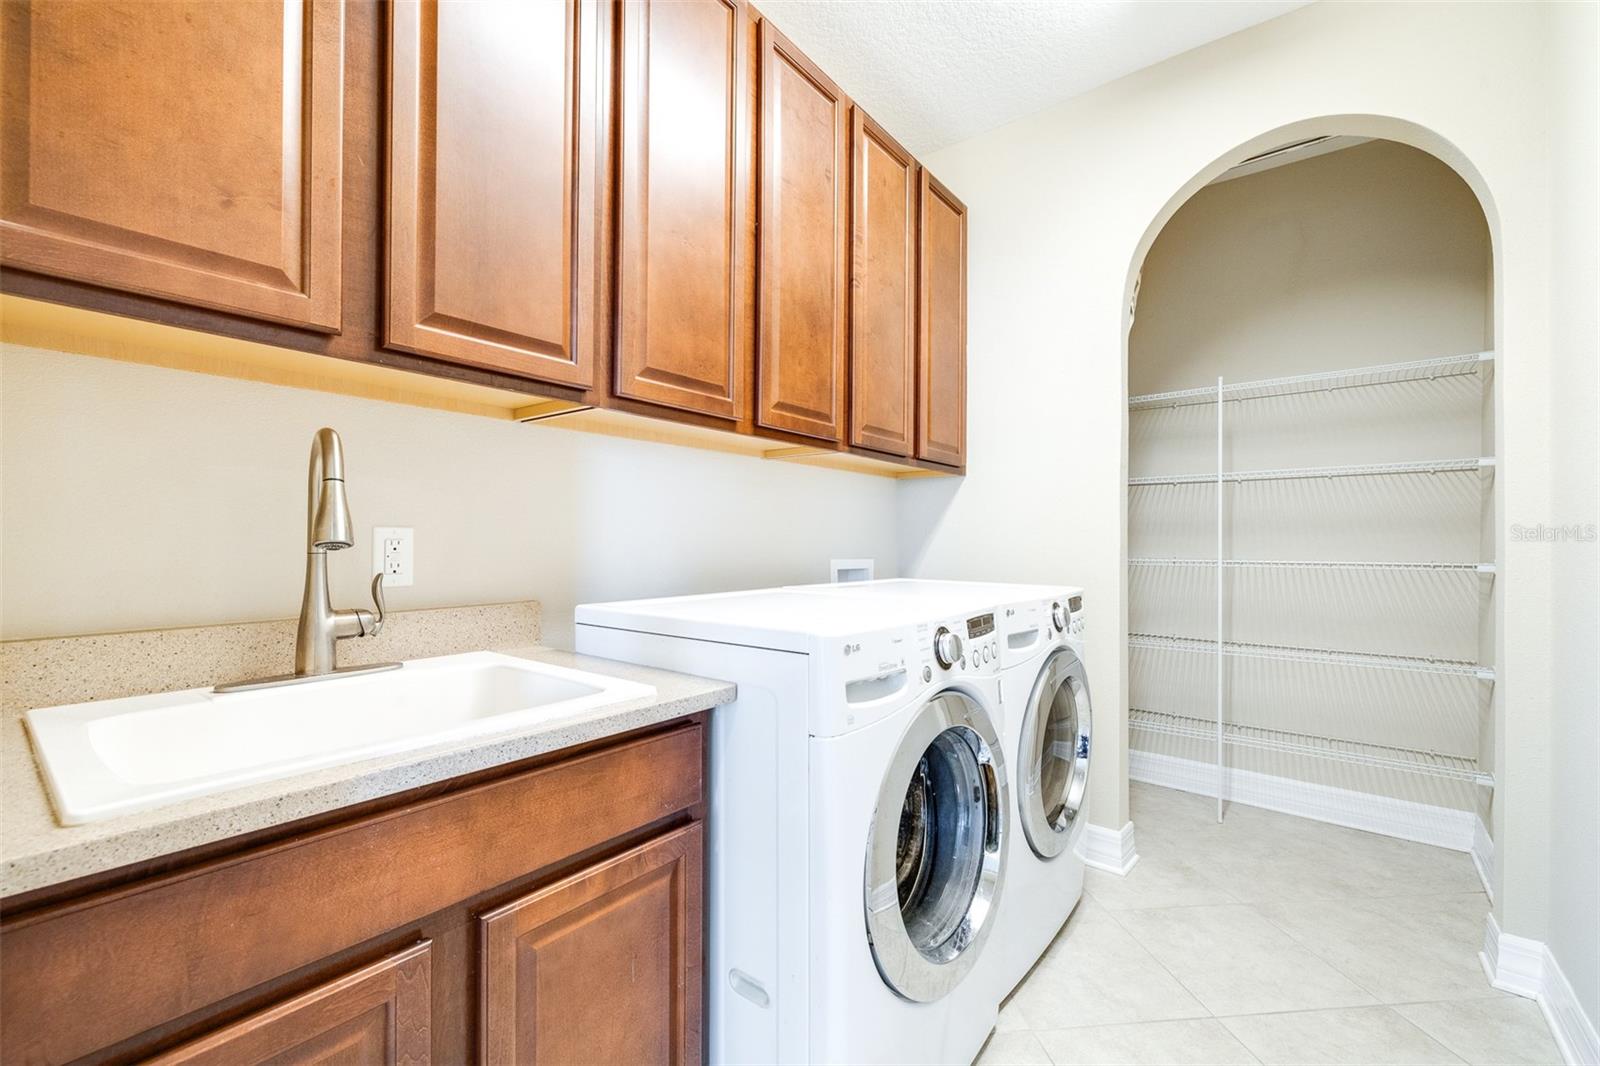 Laundry room with extra cabinets, utility sink, and walk-in storage room/closet